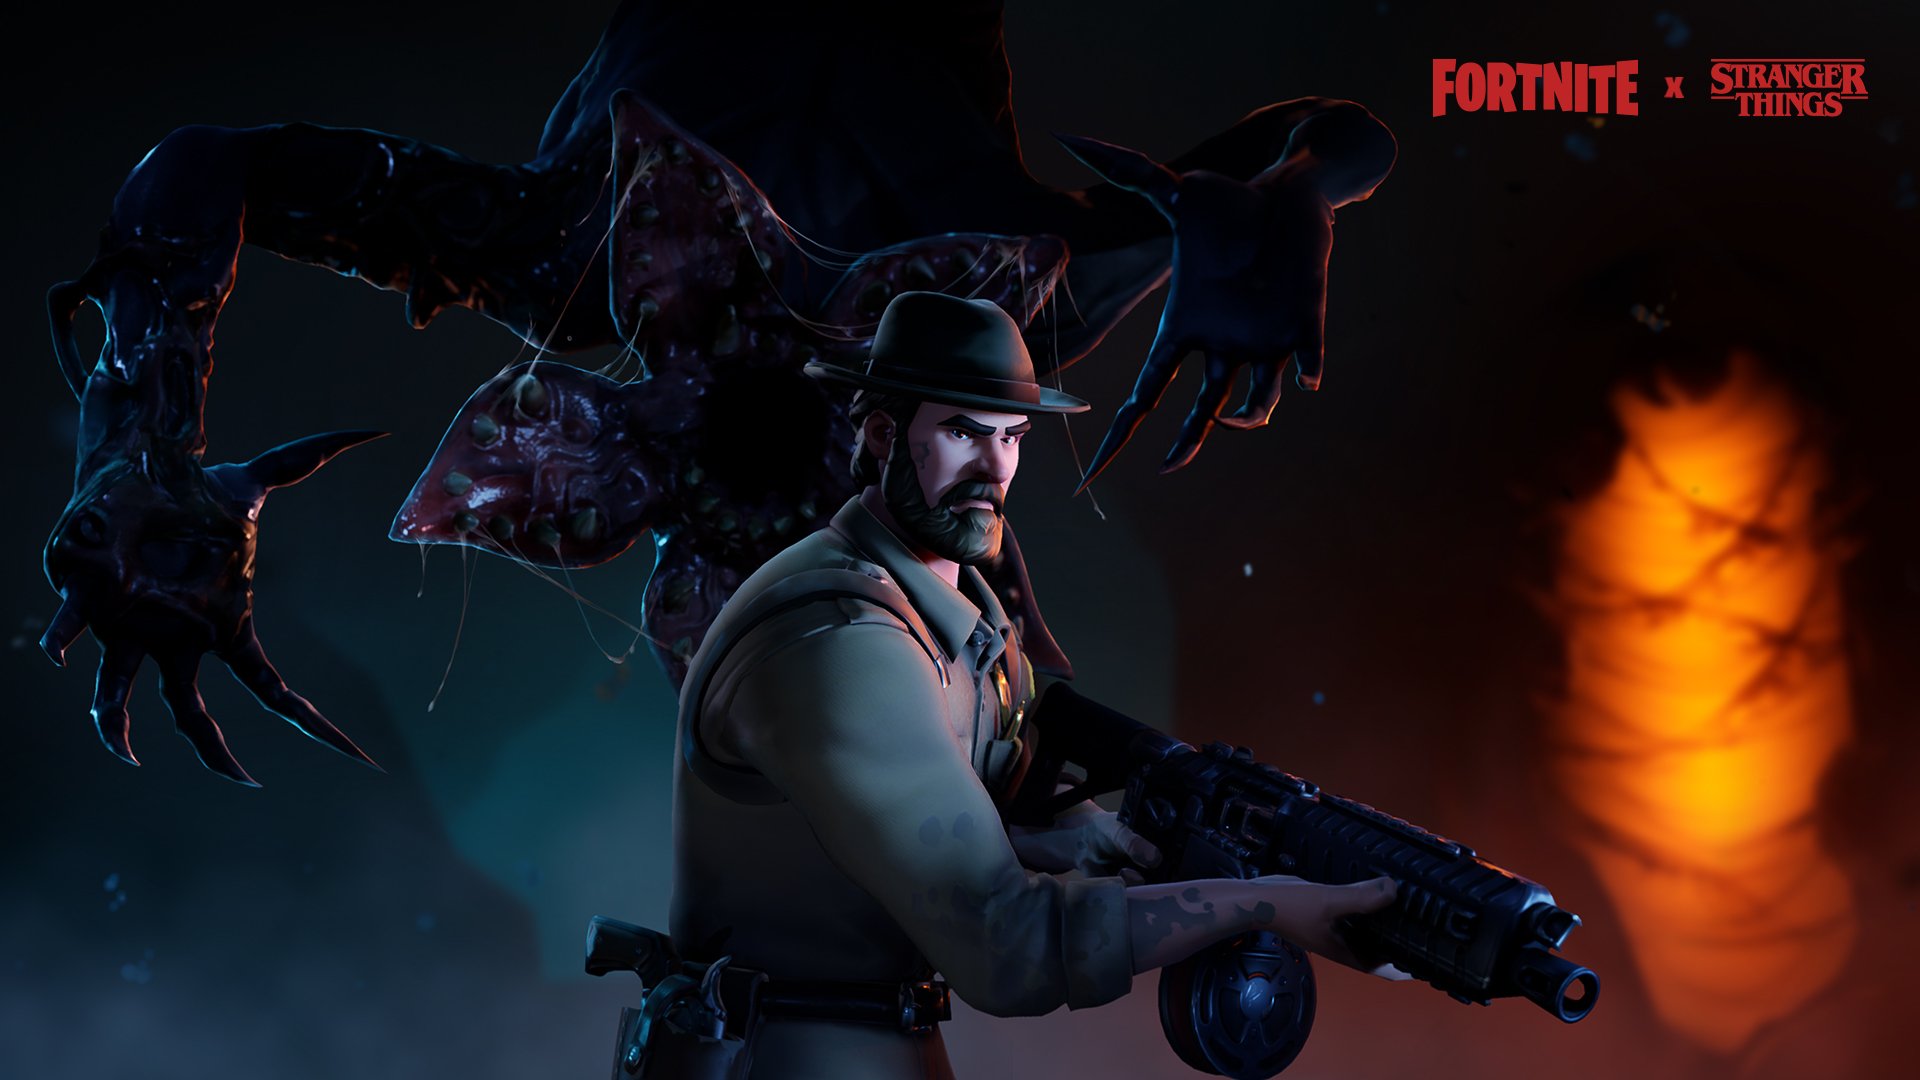 Fortnite x Stranger Things cosmetic items available now   Final Weapon 1920x1080